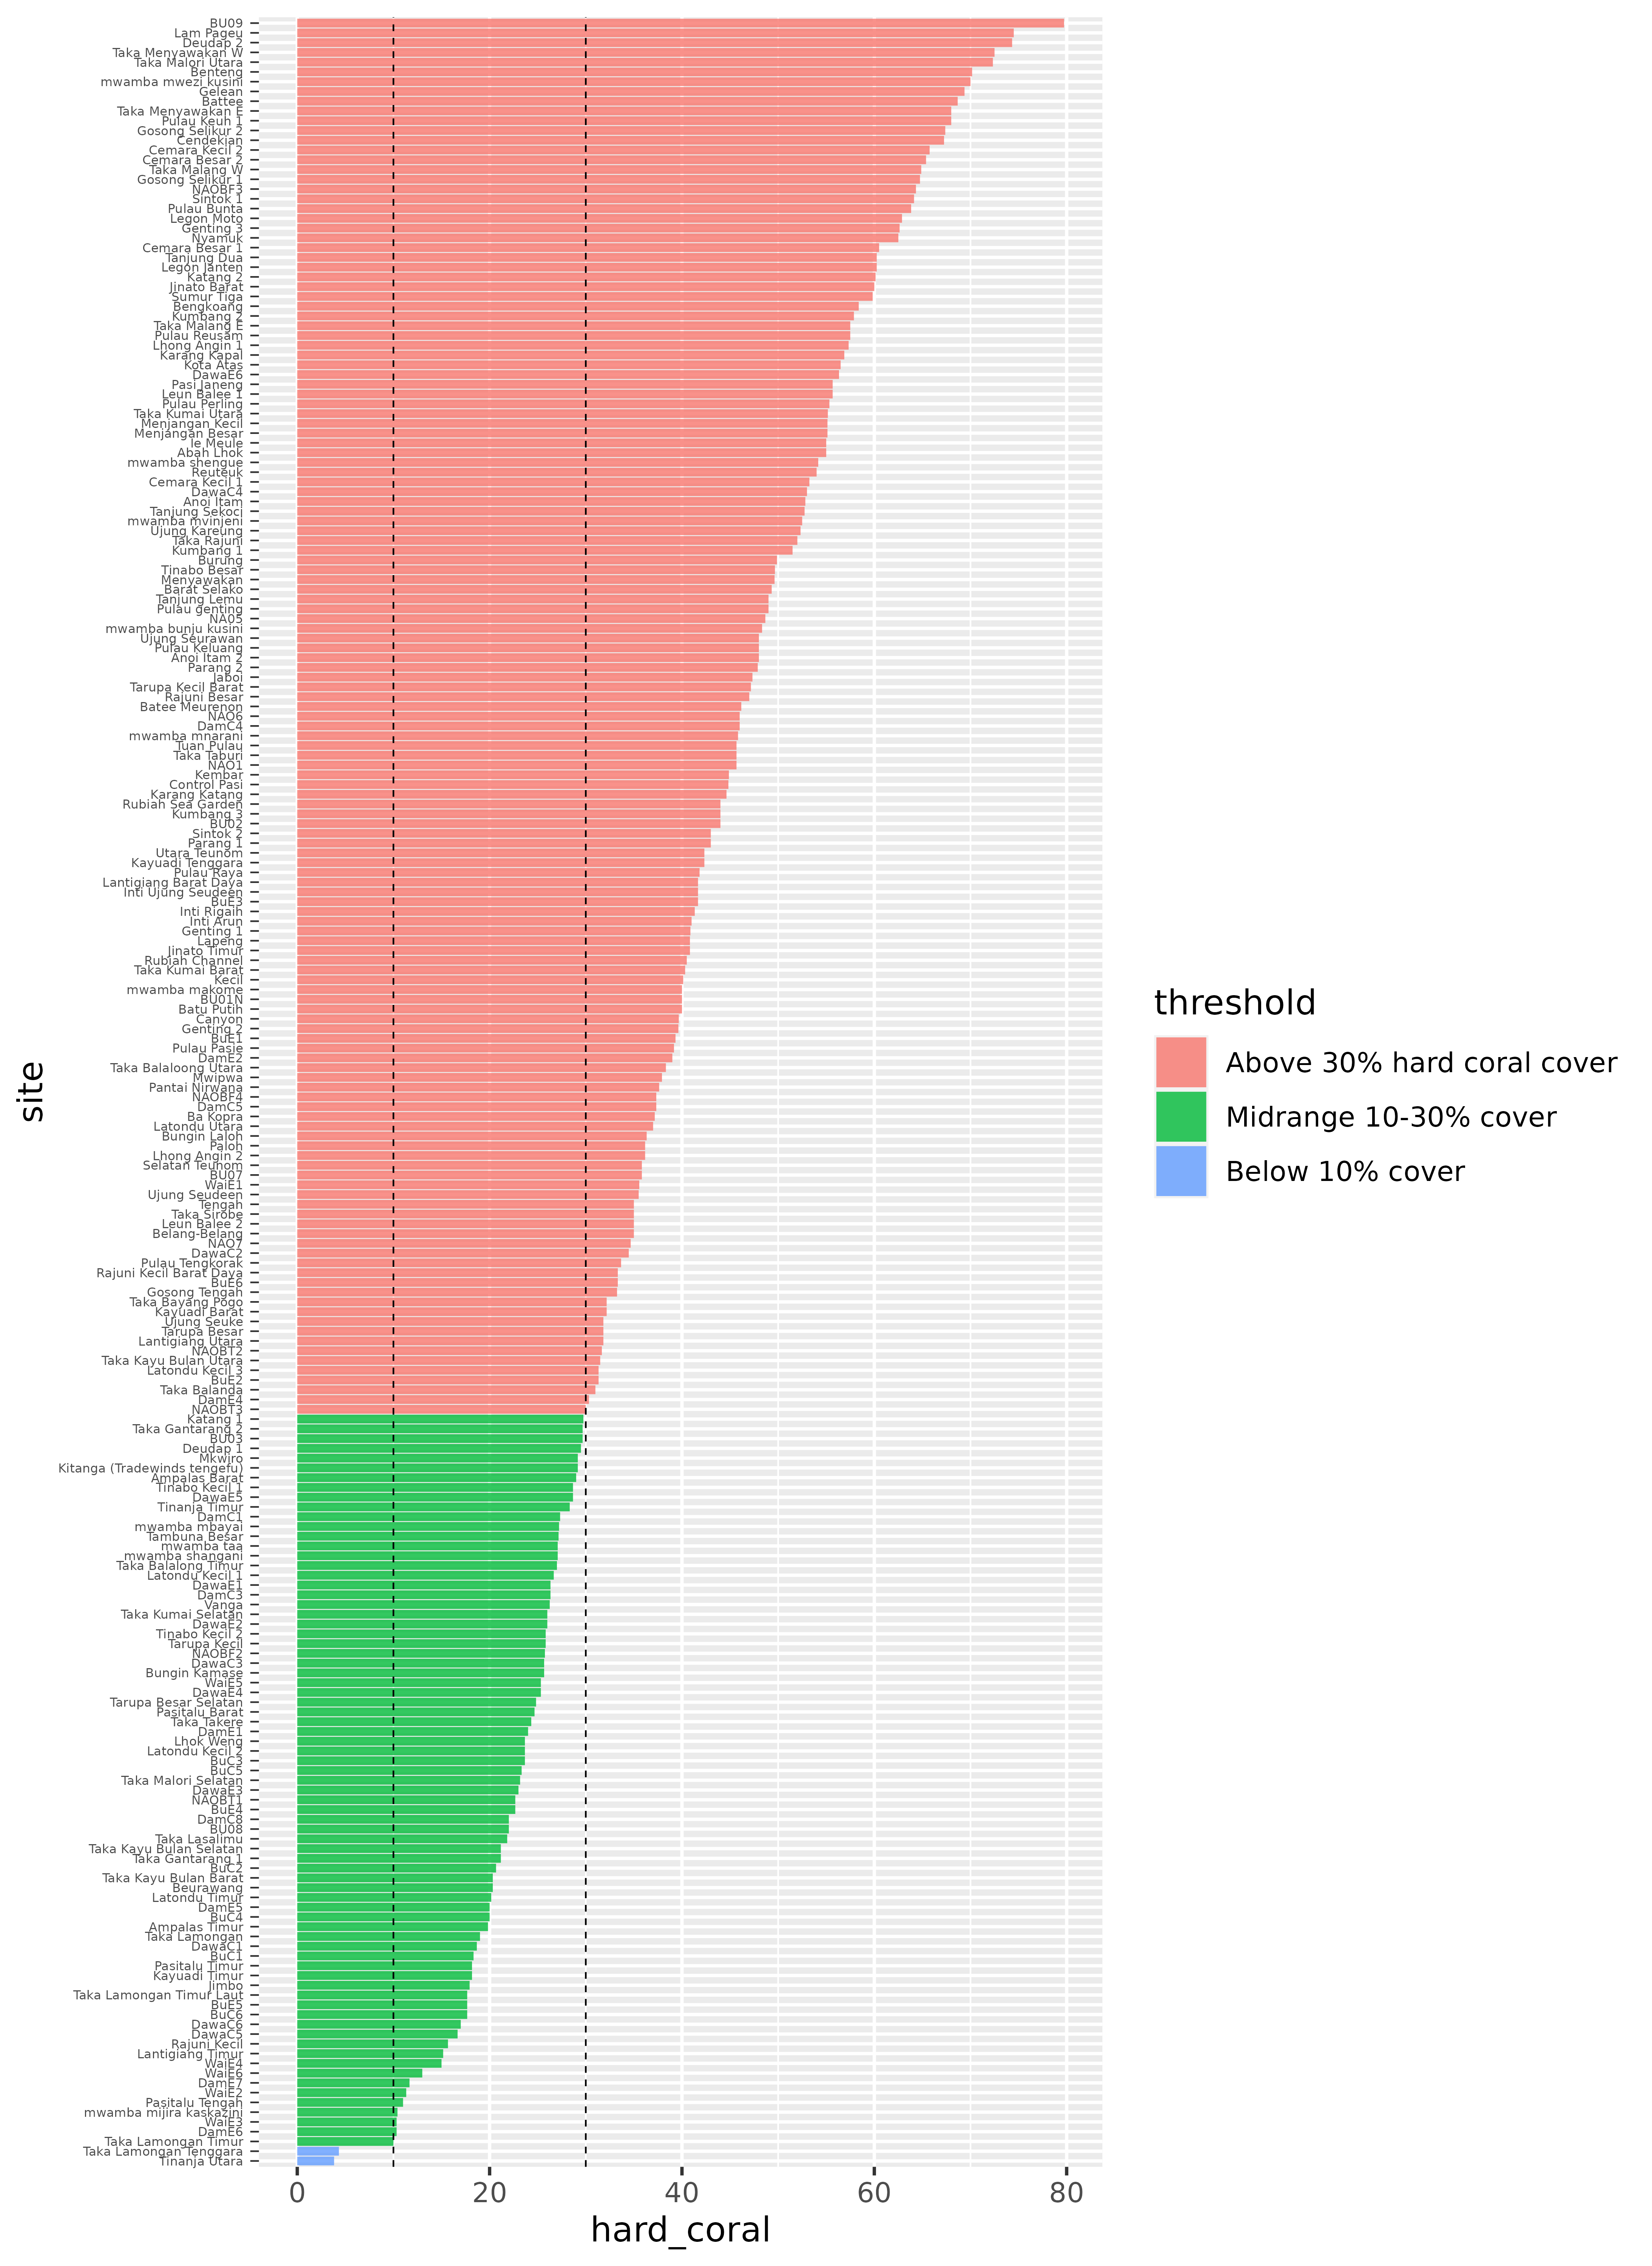 A bar chart with hard coral cover on the x axis (titled hard_coral) and sites on the y axis (titled site). The bars are colored in pink, green, and blue, according to whether they have above 30% hard coral cover, 10-30% cover, or below 10% cover. The sites are ordered by their hard coral coverage, from highest to lowest. There is a dashed vertical line at 10% and 30% hard coral.